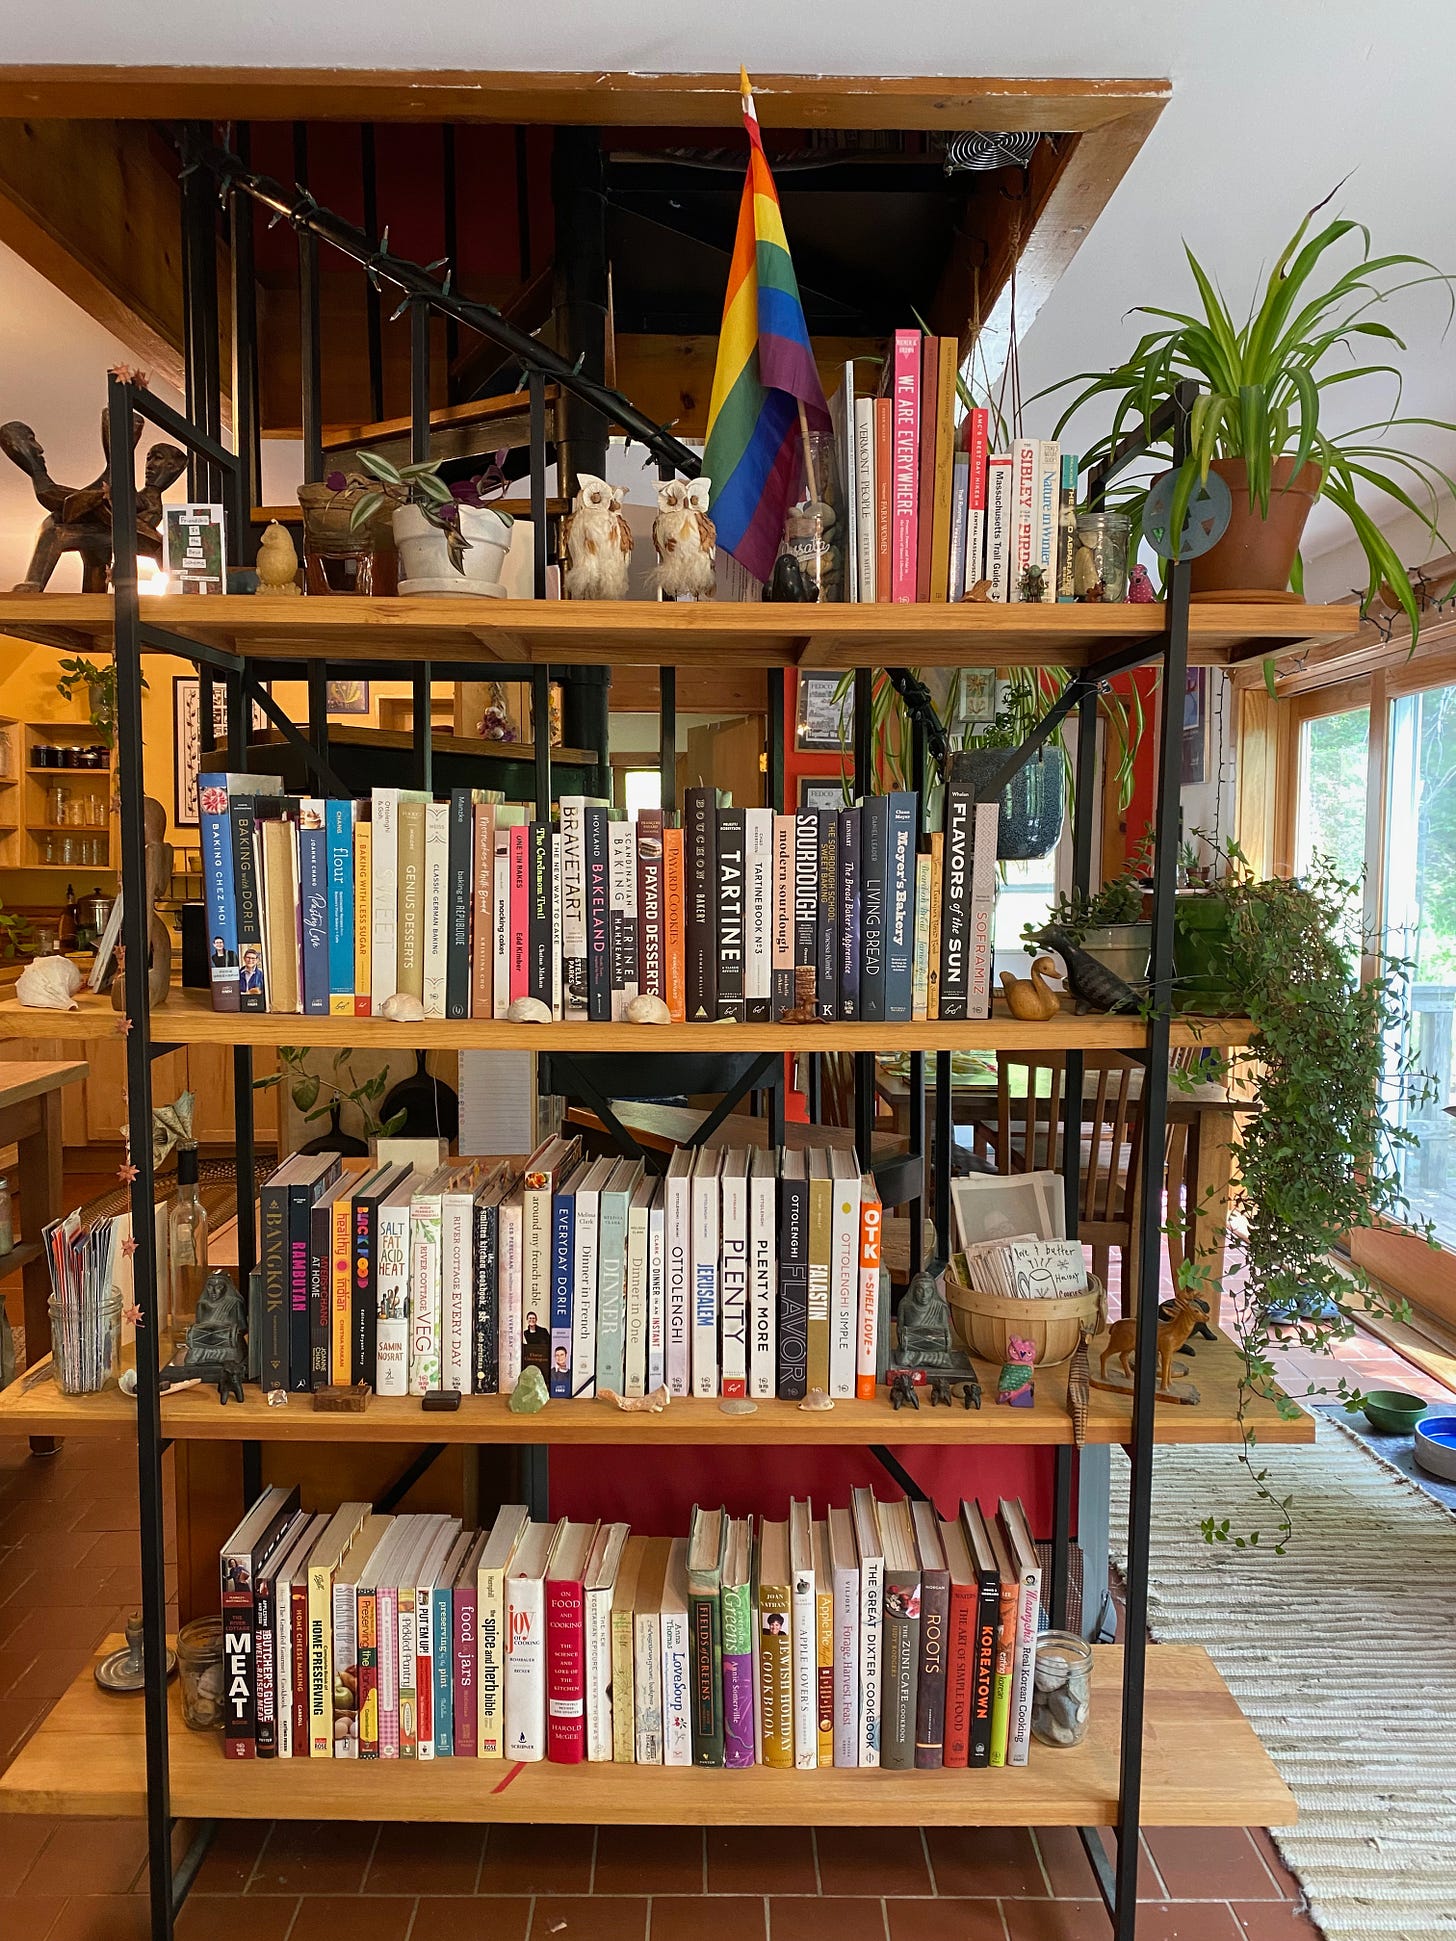 A large open bookshelf displaying lots of cookbooks, decorated with plants, small figurines, a pride flag, cards, shells, and stones.